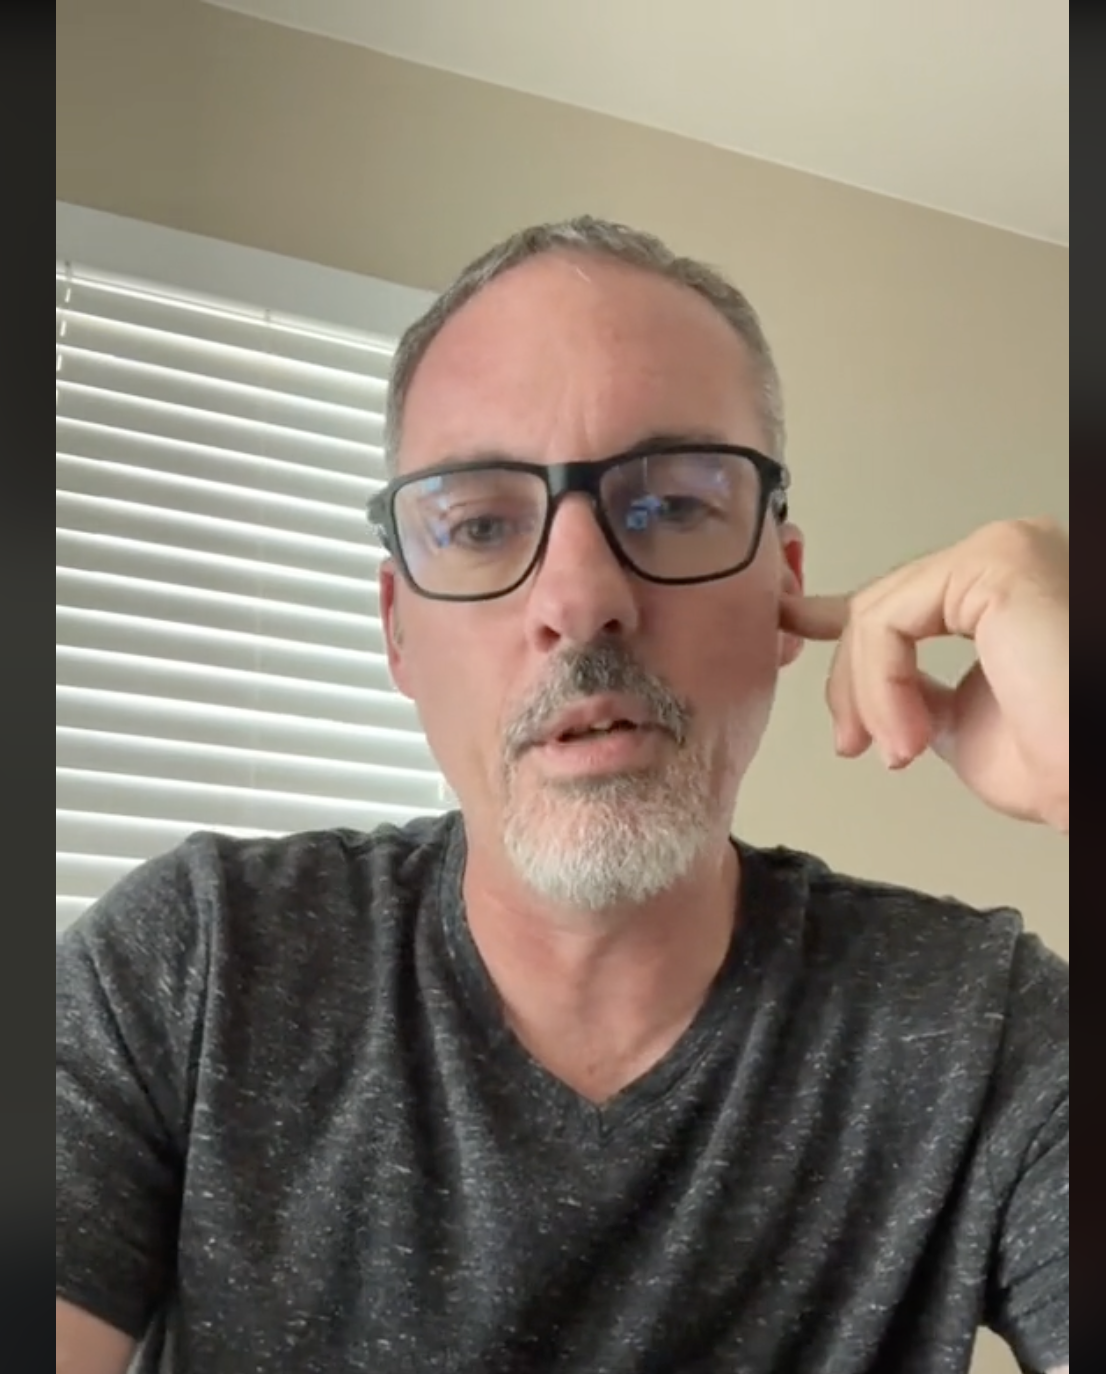 Christian sharing his nightmare dating experience, as seen in a video dated September 10, 2022 | Source: TikTok/christiannollinger